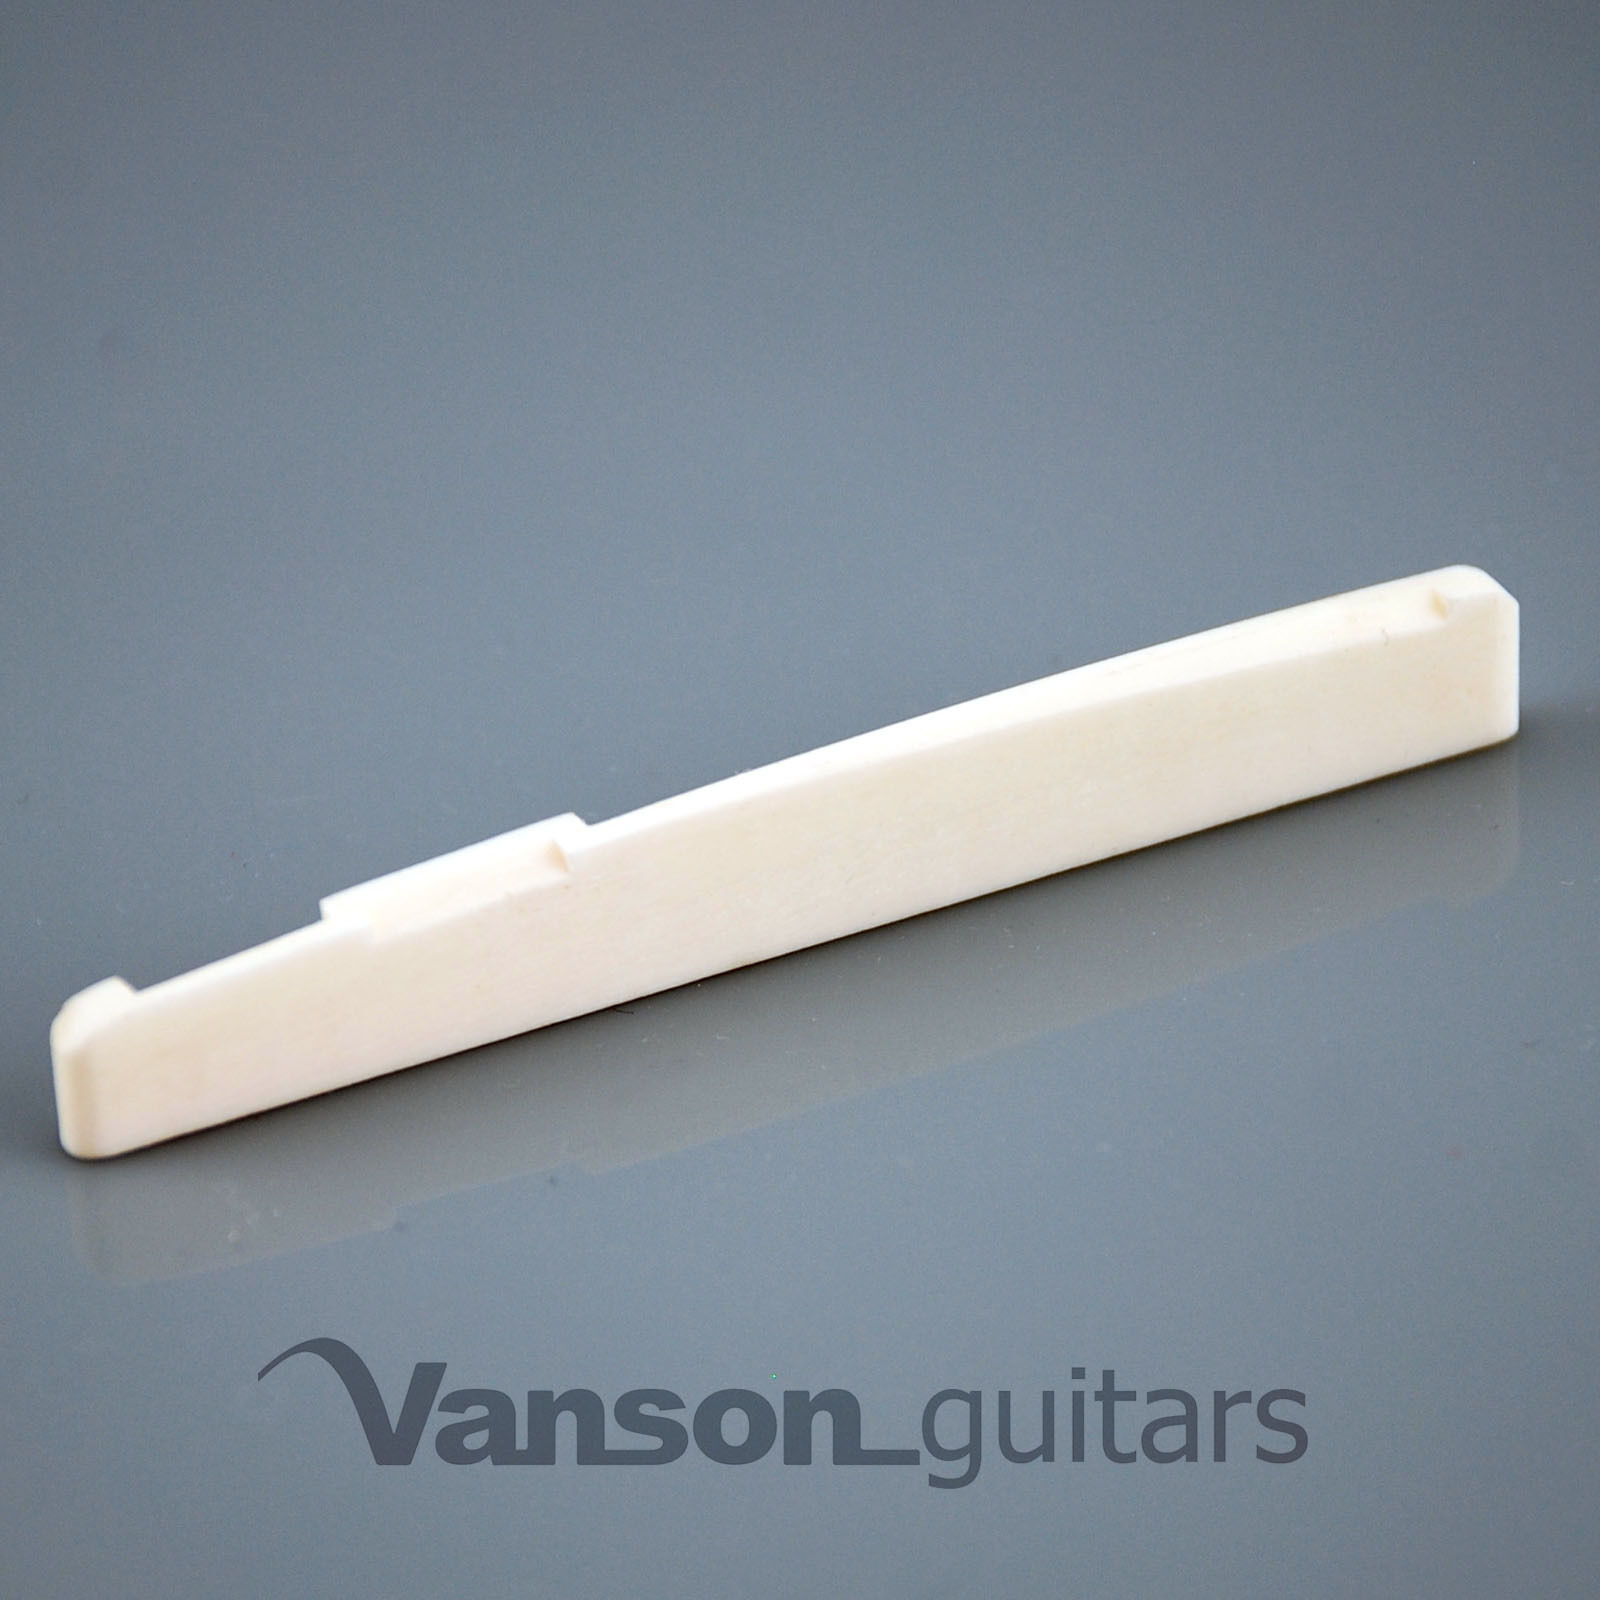 NEW High quality Vanson 72mm Compensated & Int. Bone Saddle for Acoustic Guitar